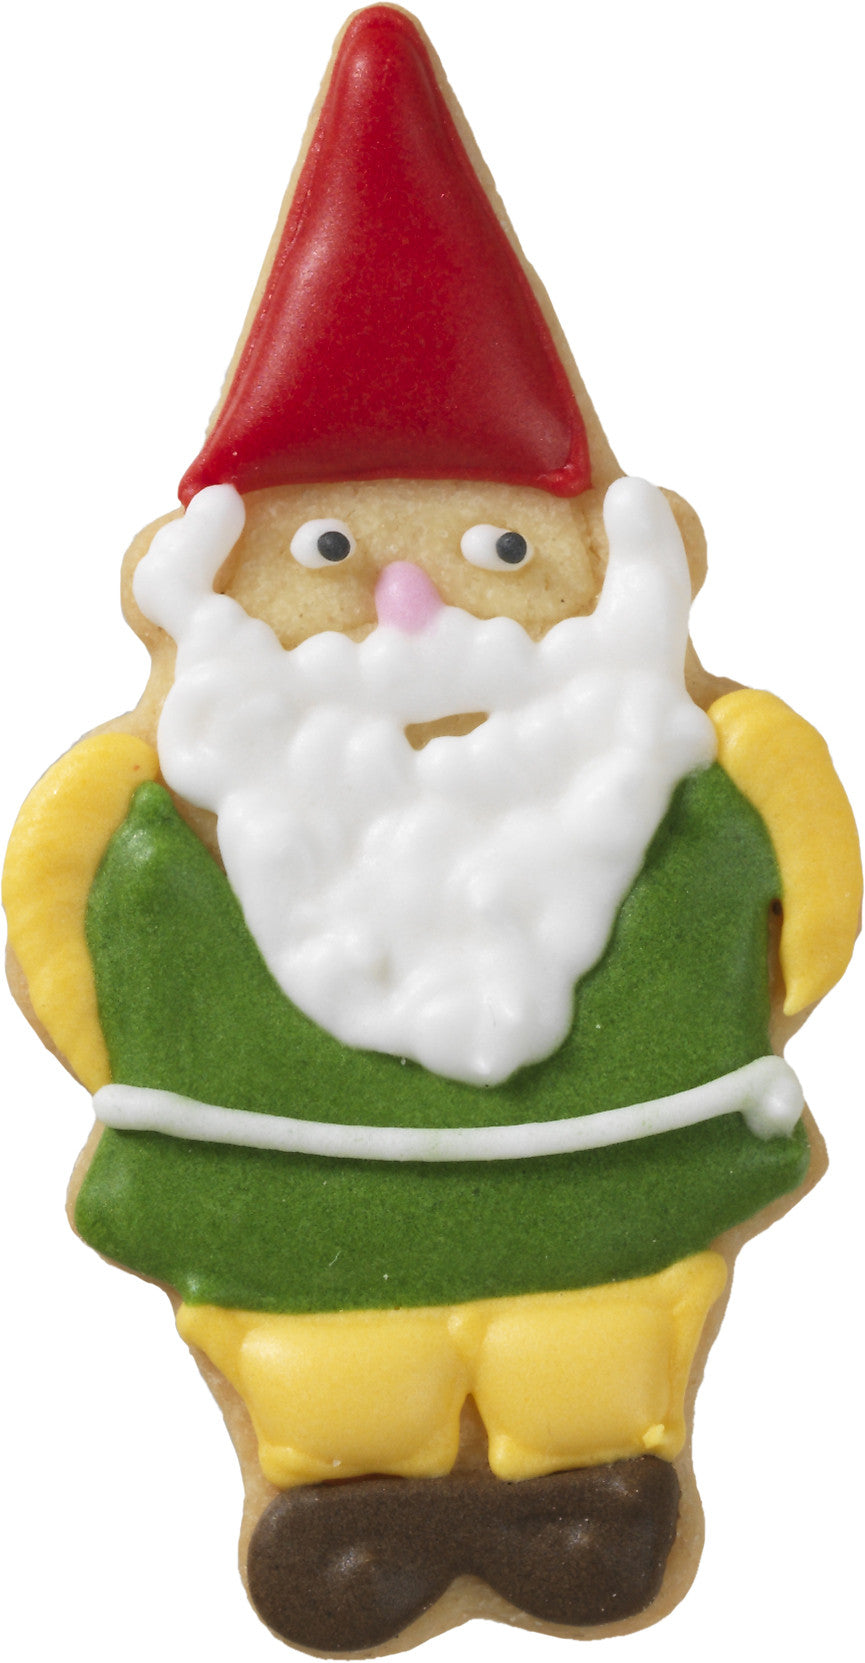 Gnome 9cm With Internal Detail Cookie Cutter | Cookie Cutter Shop Australia